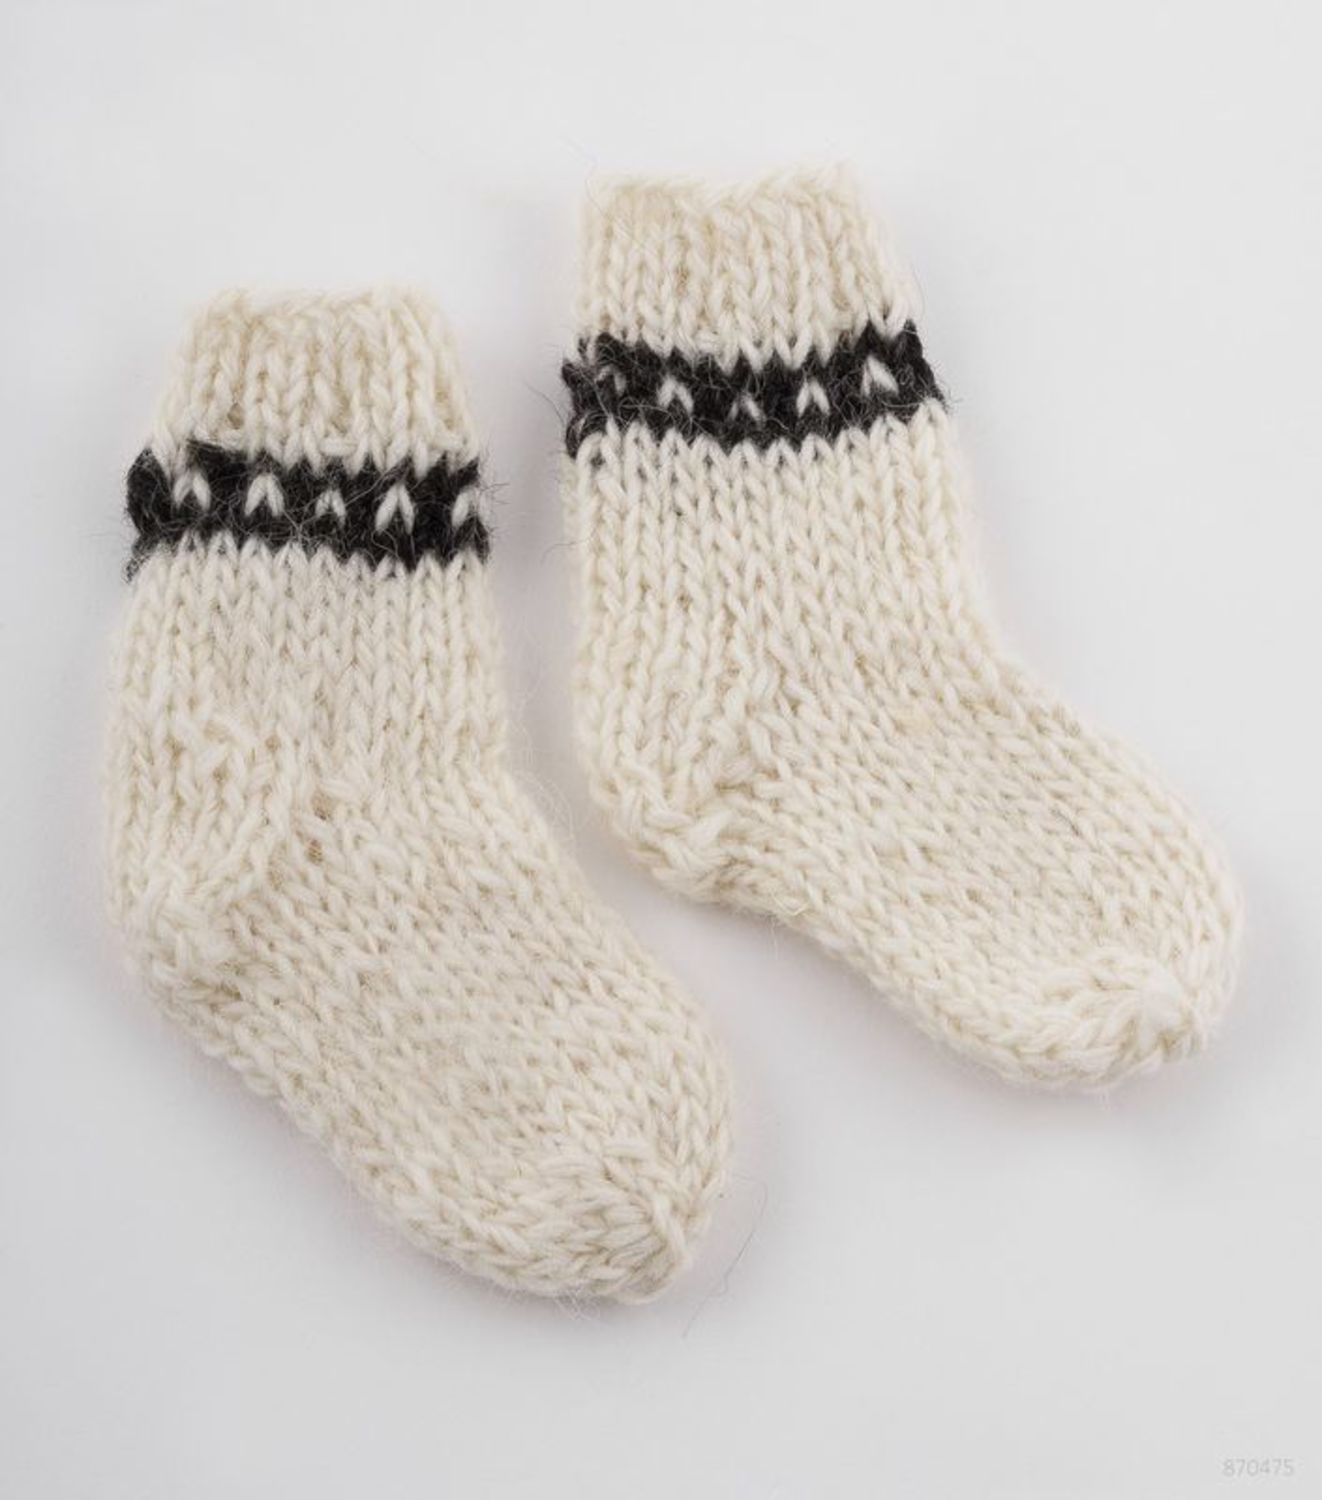 Knitted children's socks made of wool photo 2